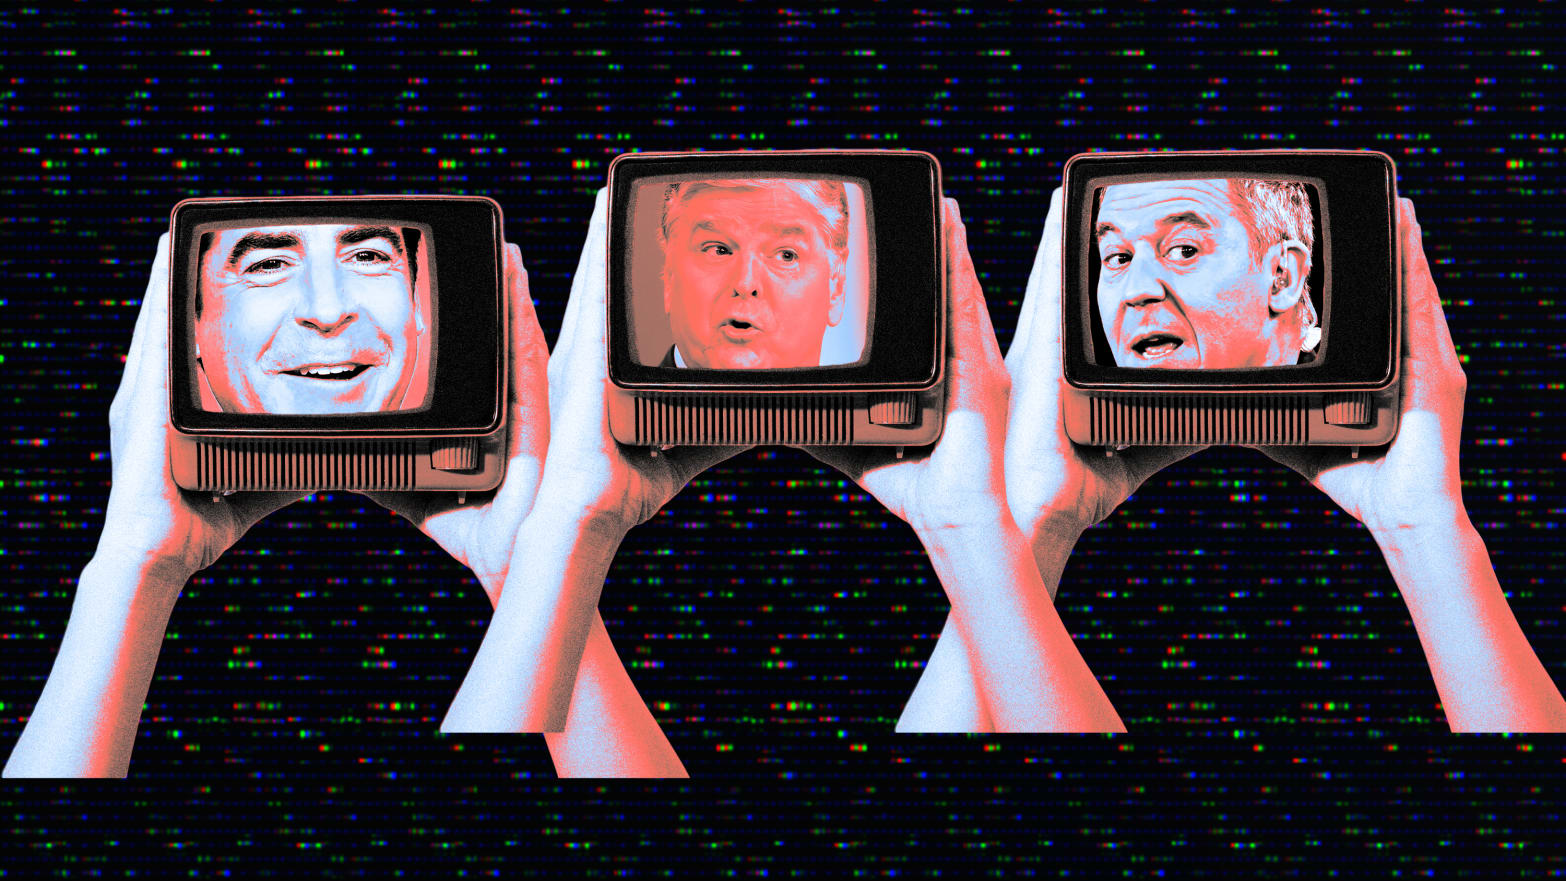 A photoillustration of three televisions being held up with the faces of Fox News hosts Jesse Watters, Sean Hannity, and Greg Gutfeld.